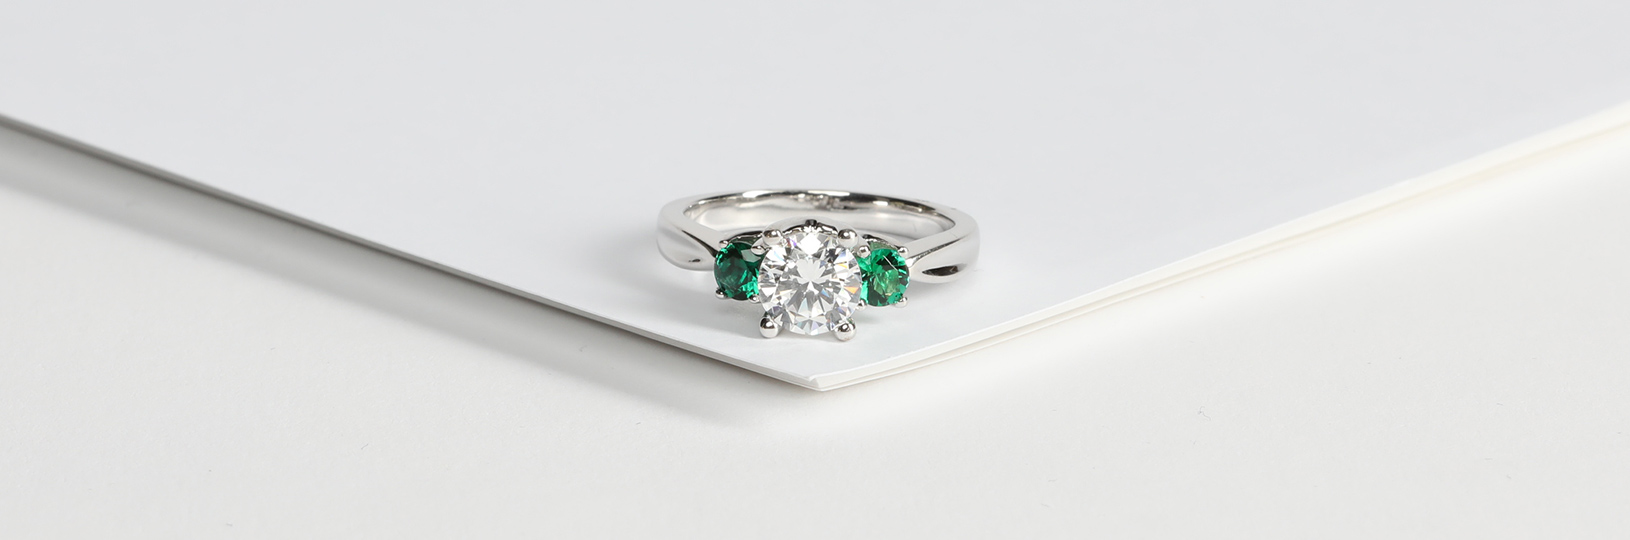 A lab created emerald engagement ring.